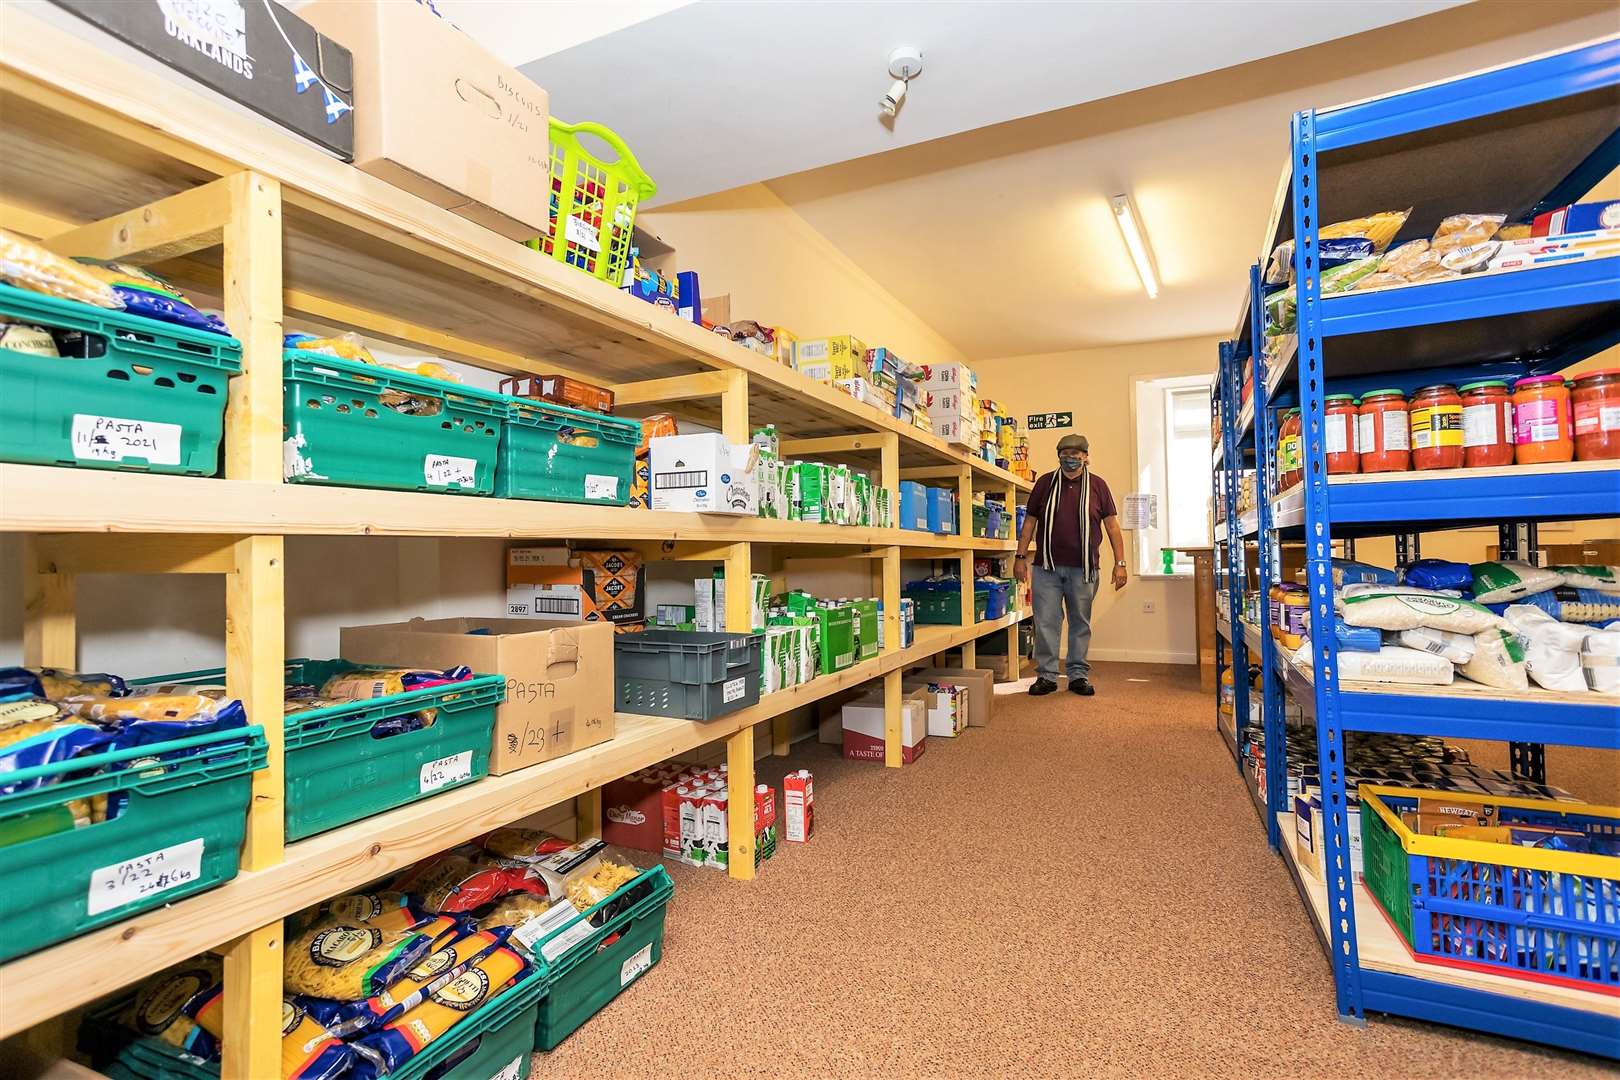 Caithness Foodbank is available to help people through hard times.